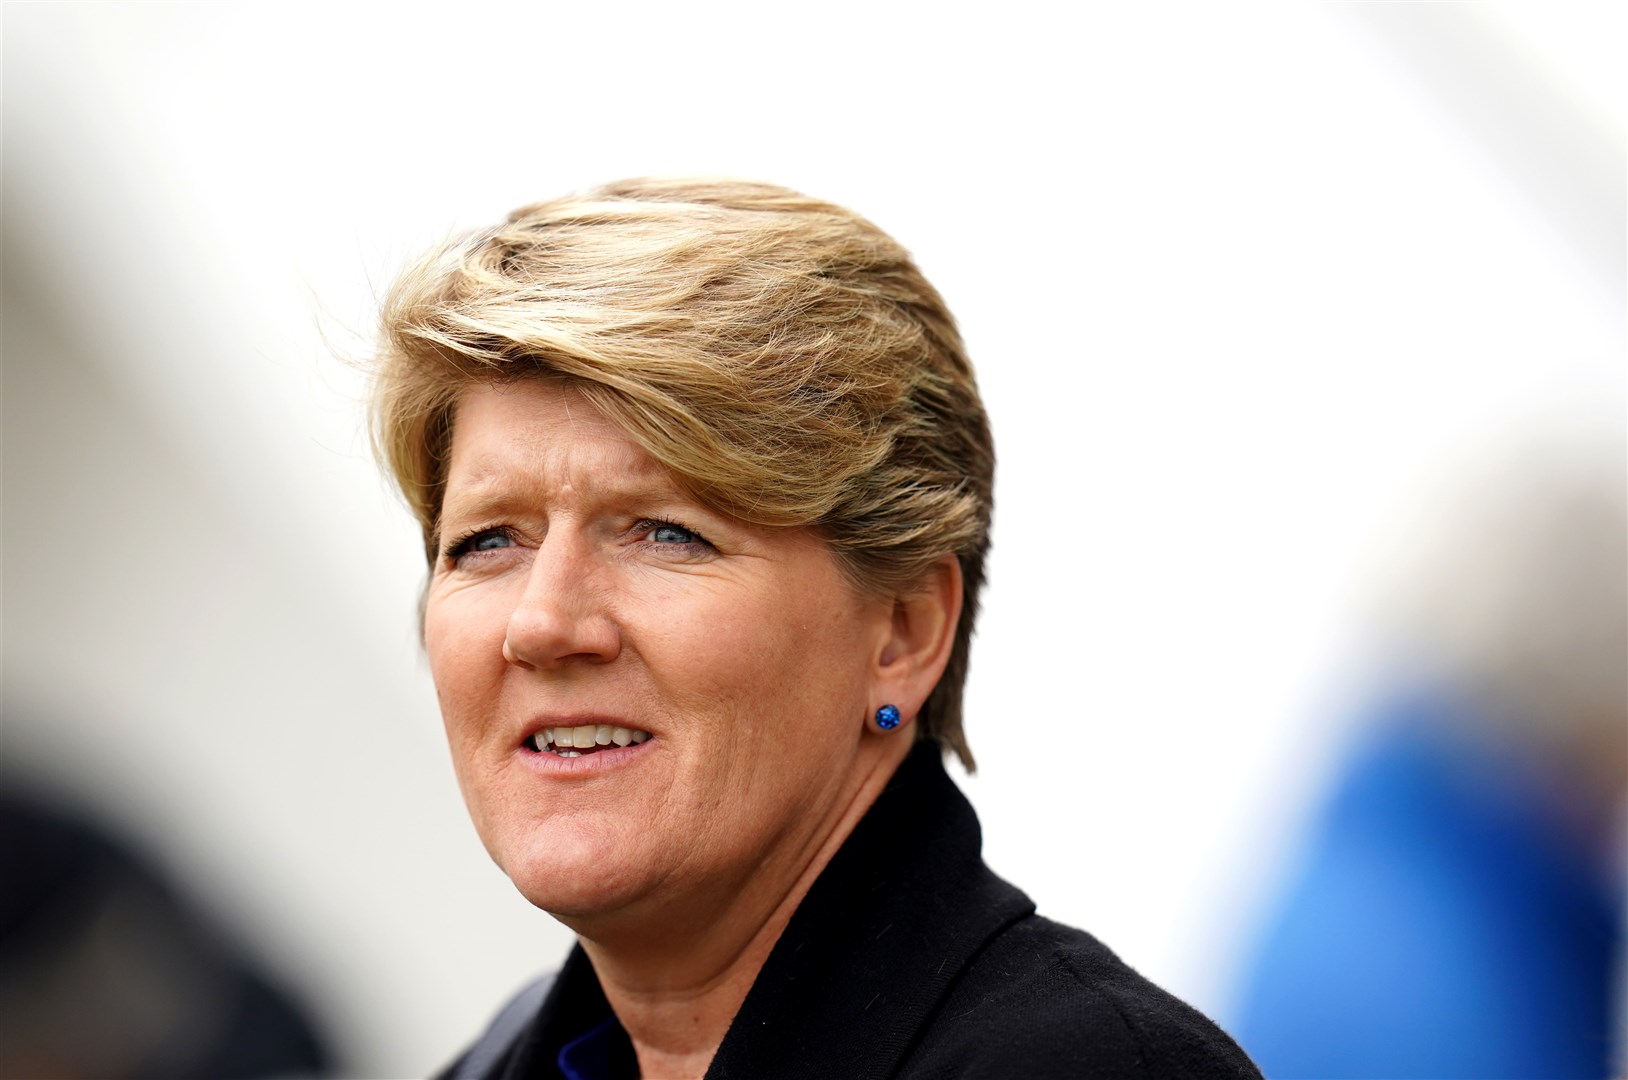 Clare Balding attends the Epsom Downs Spring Meeting at Epsom Downs Racecourse (John Walton/PA)